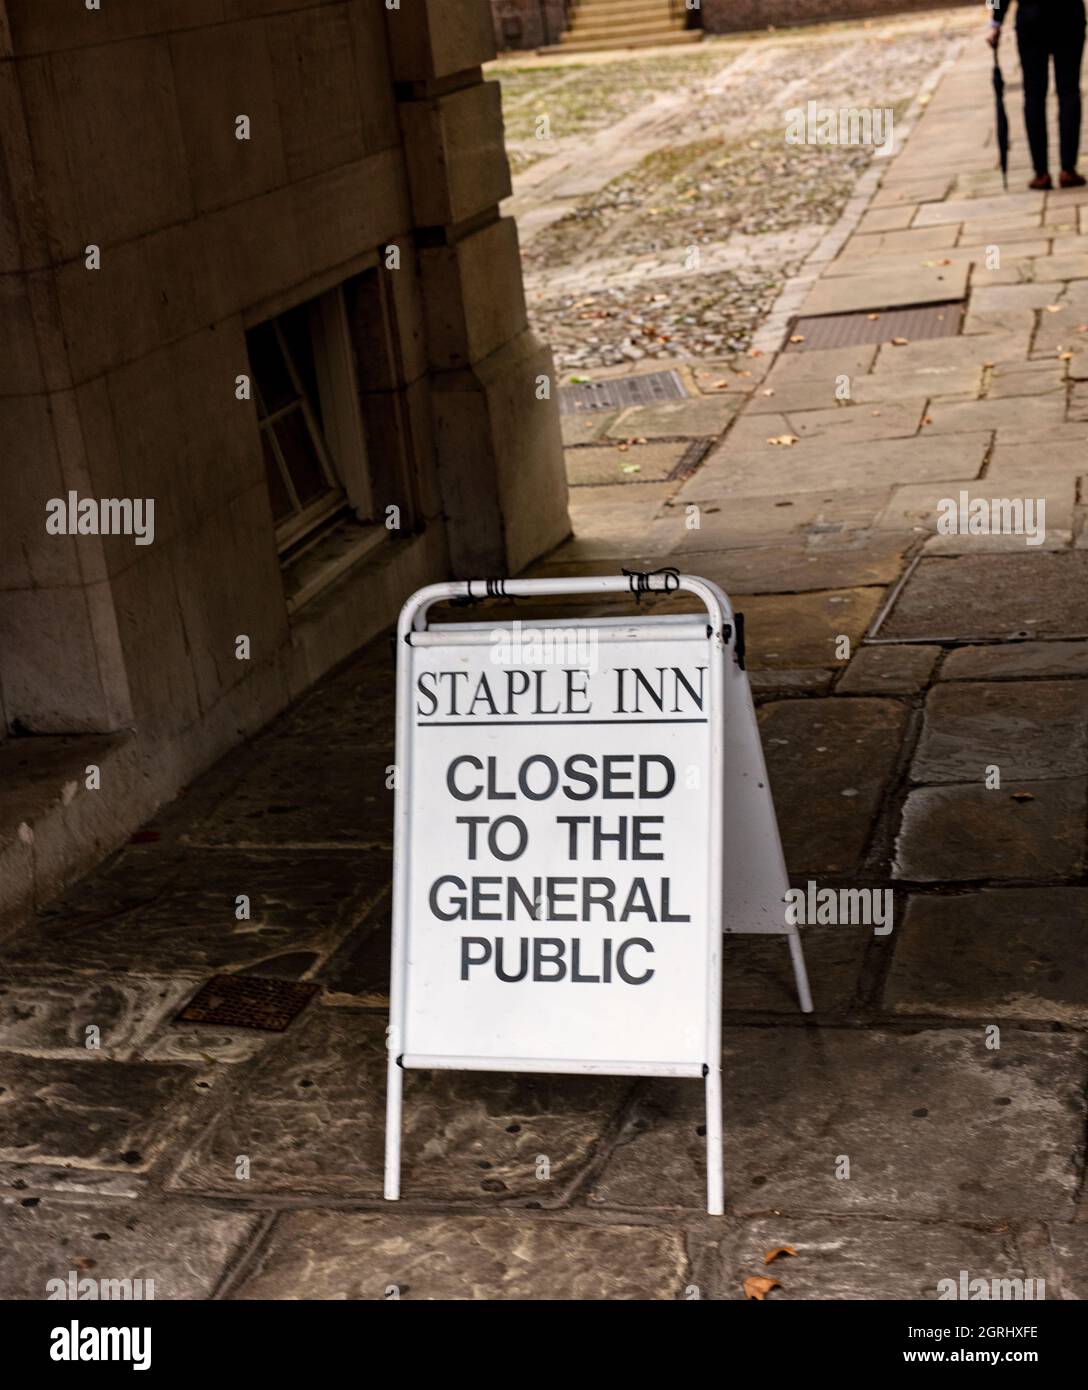 Staple Inn, Holborn, London; one of the Inns of Court housing barristers' chambers; a sign indicating that the Inn is closed to the public Stock Photo